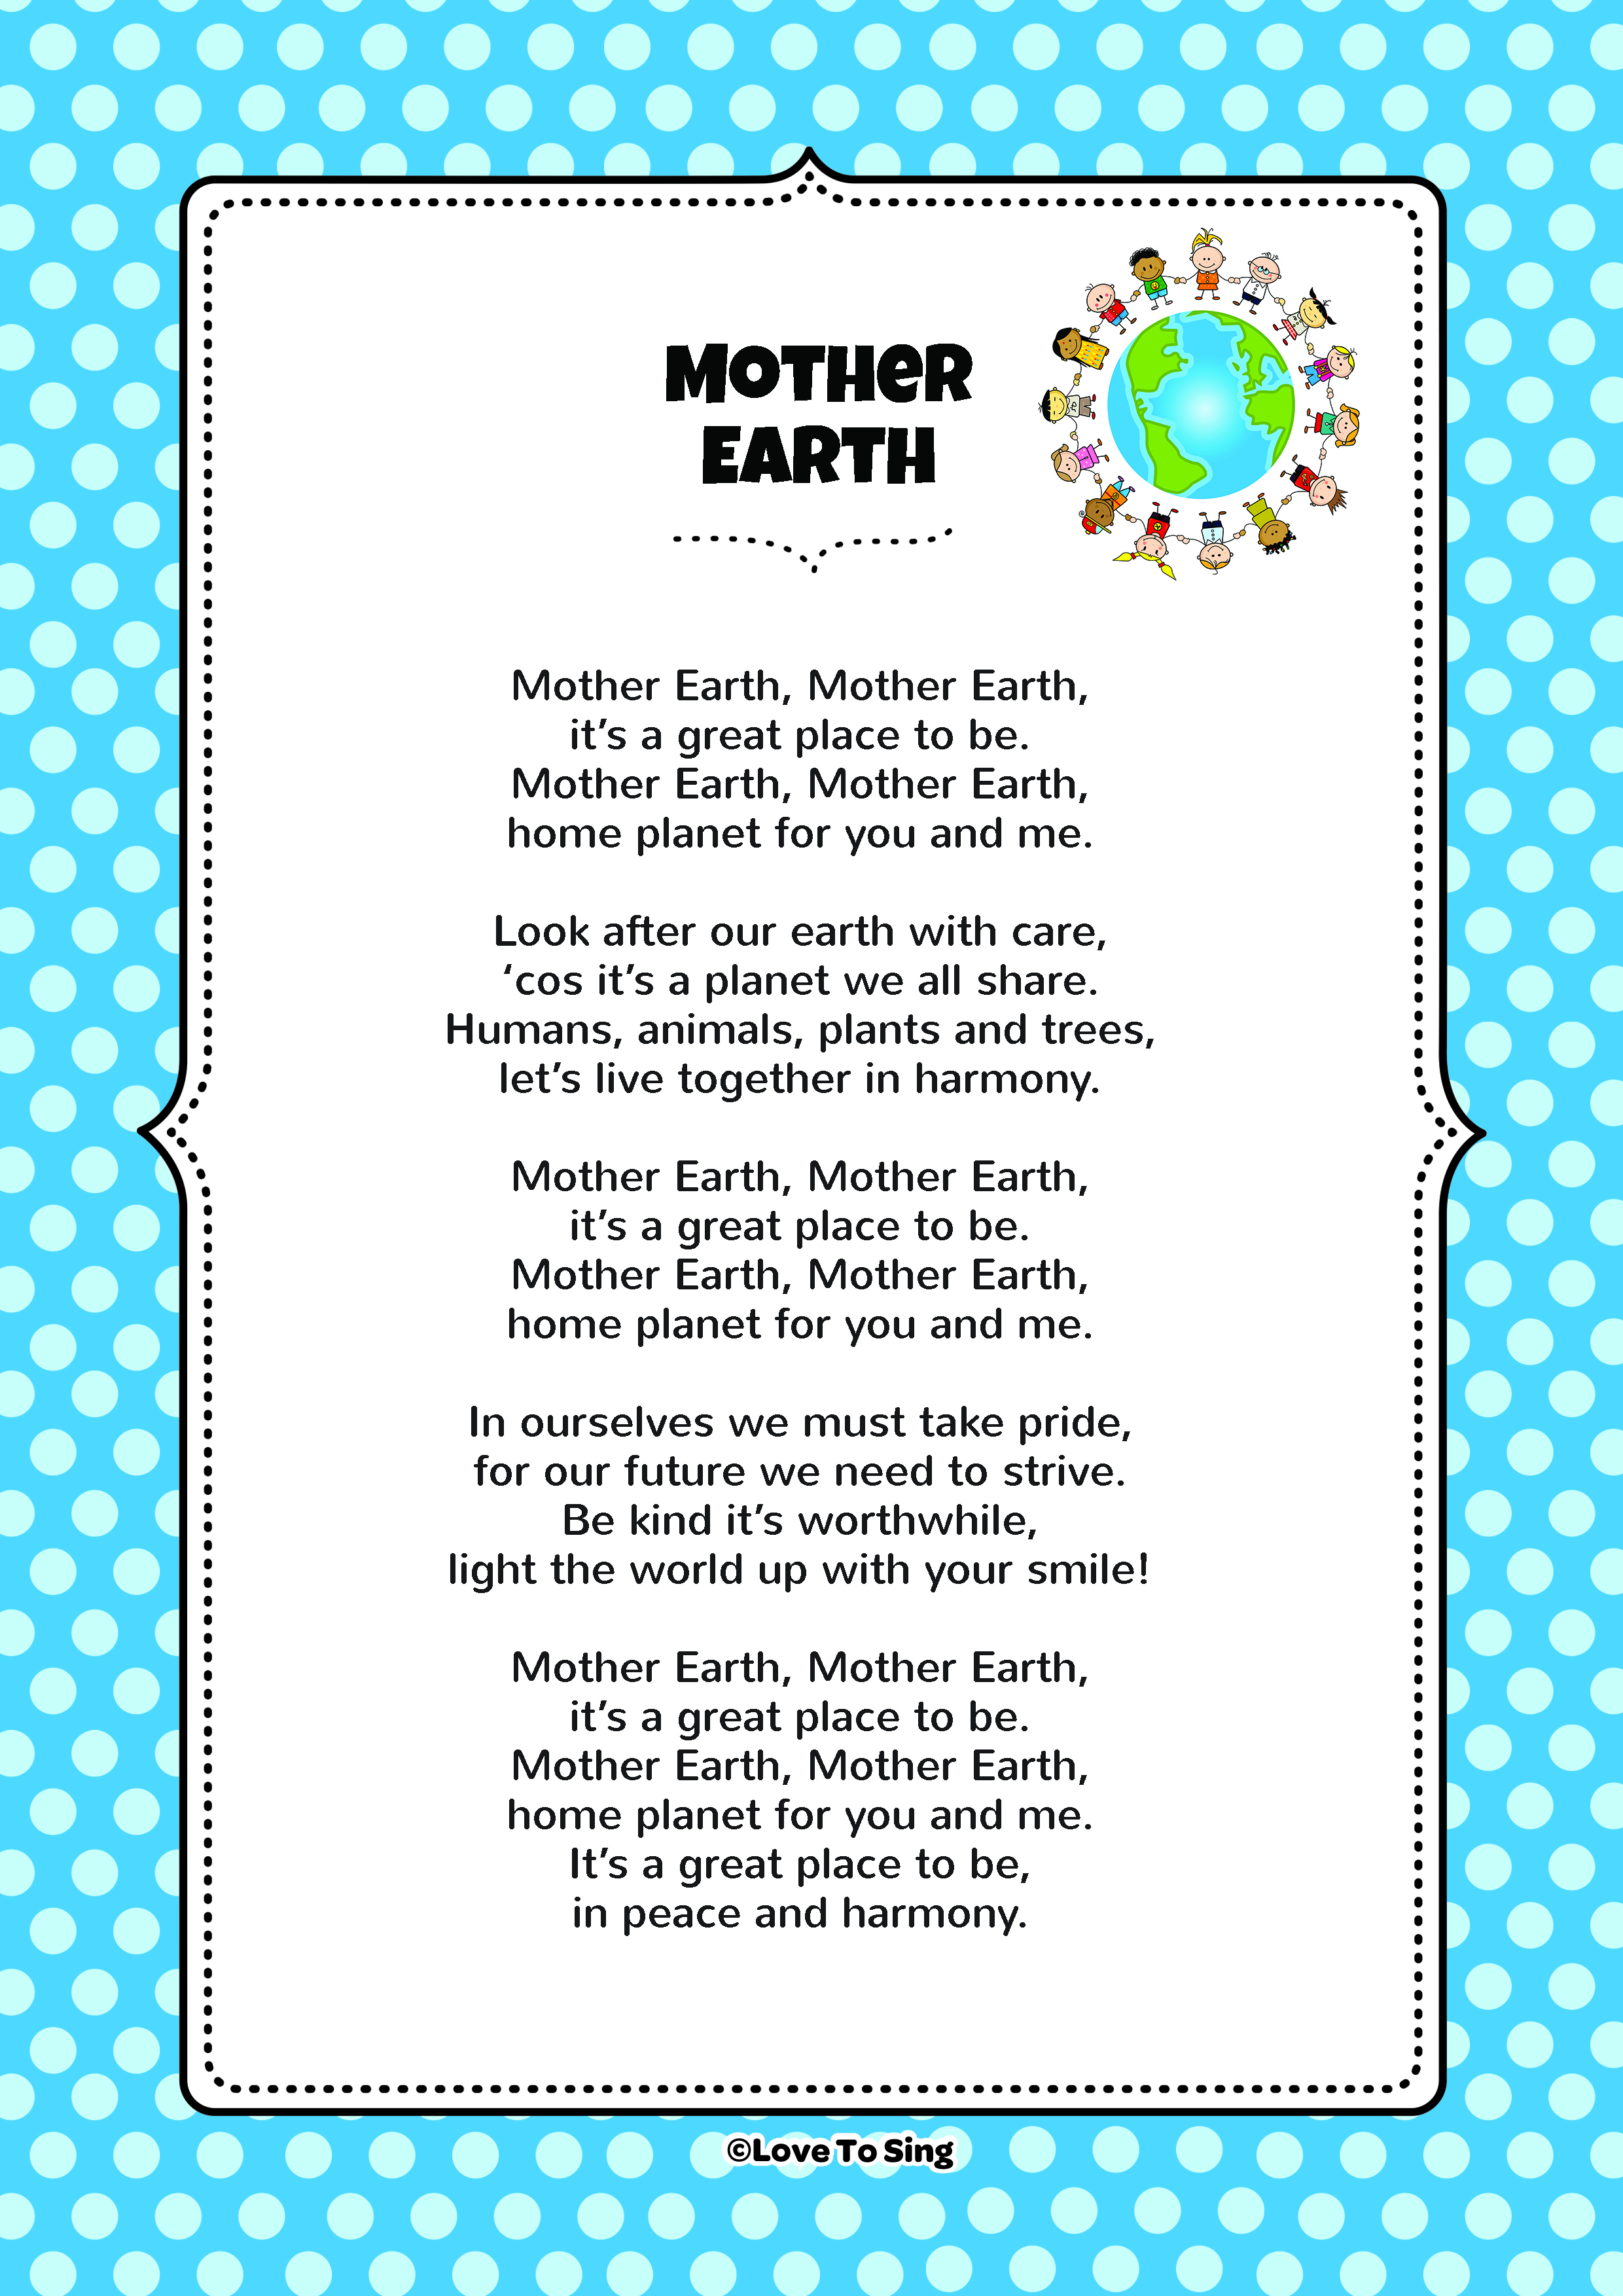 Mother Earth | Kids Video Song with FREE Lyrics & Activities!